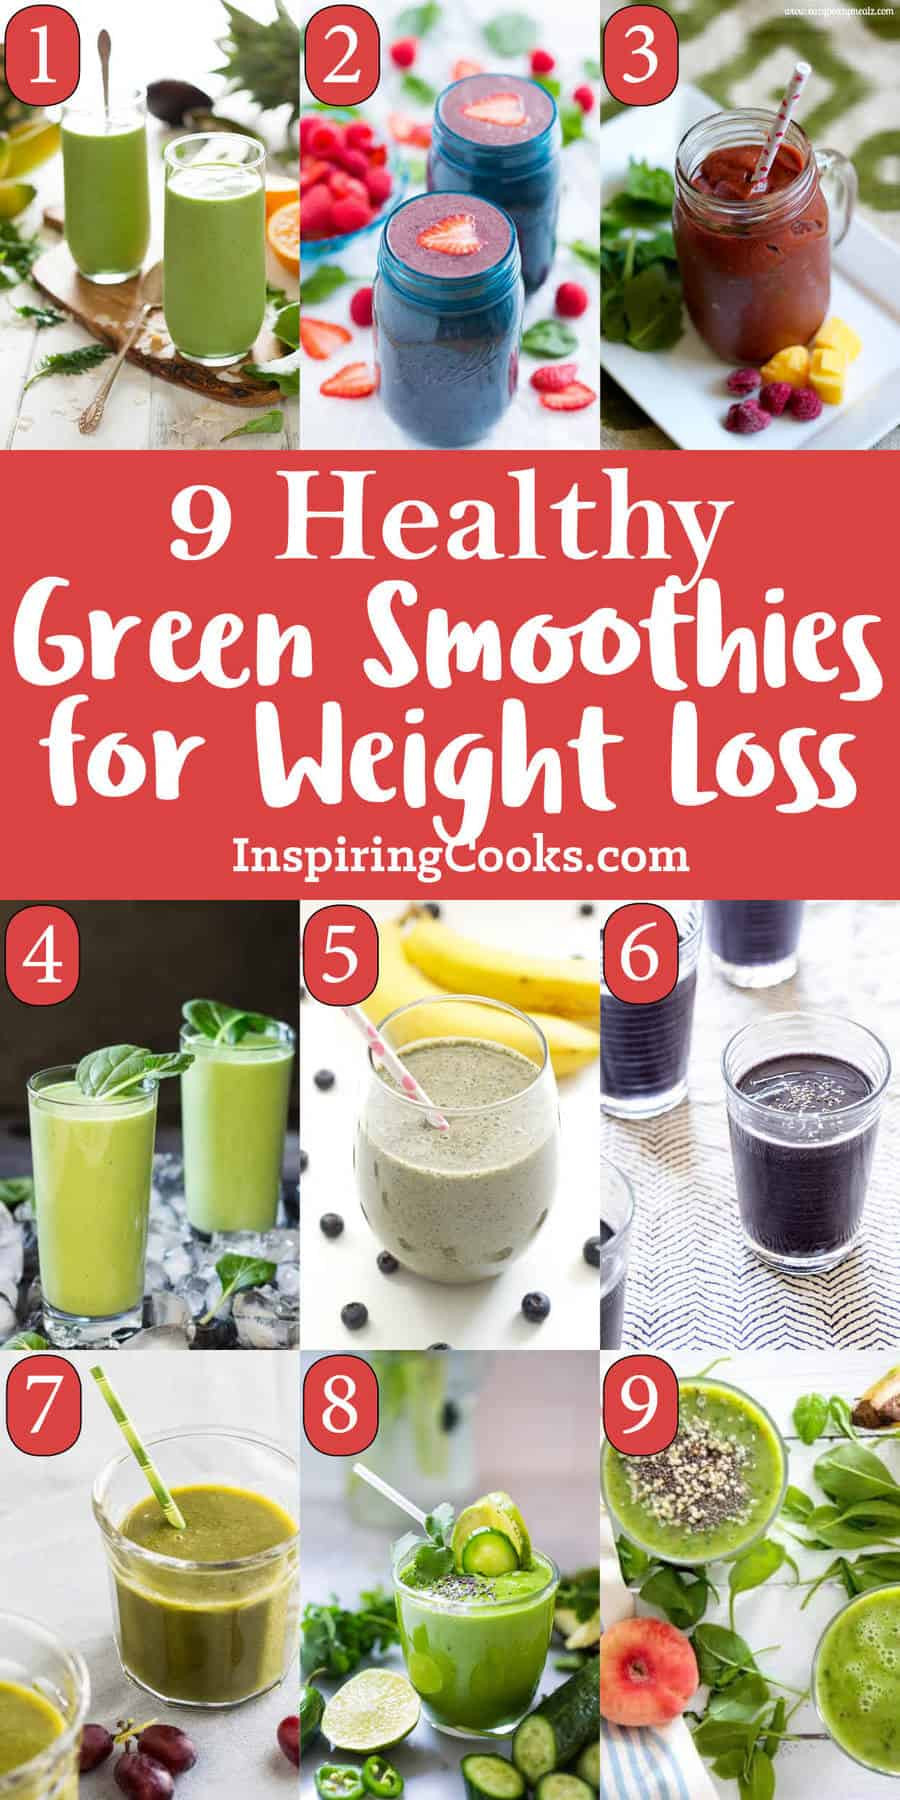 Healthy Green Smoothies
 The Best 9 Healthy Green Smoothies for Weight Loss Recipes